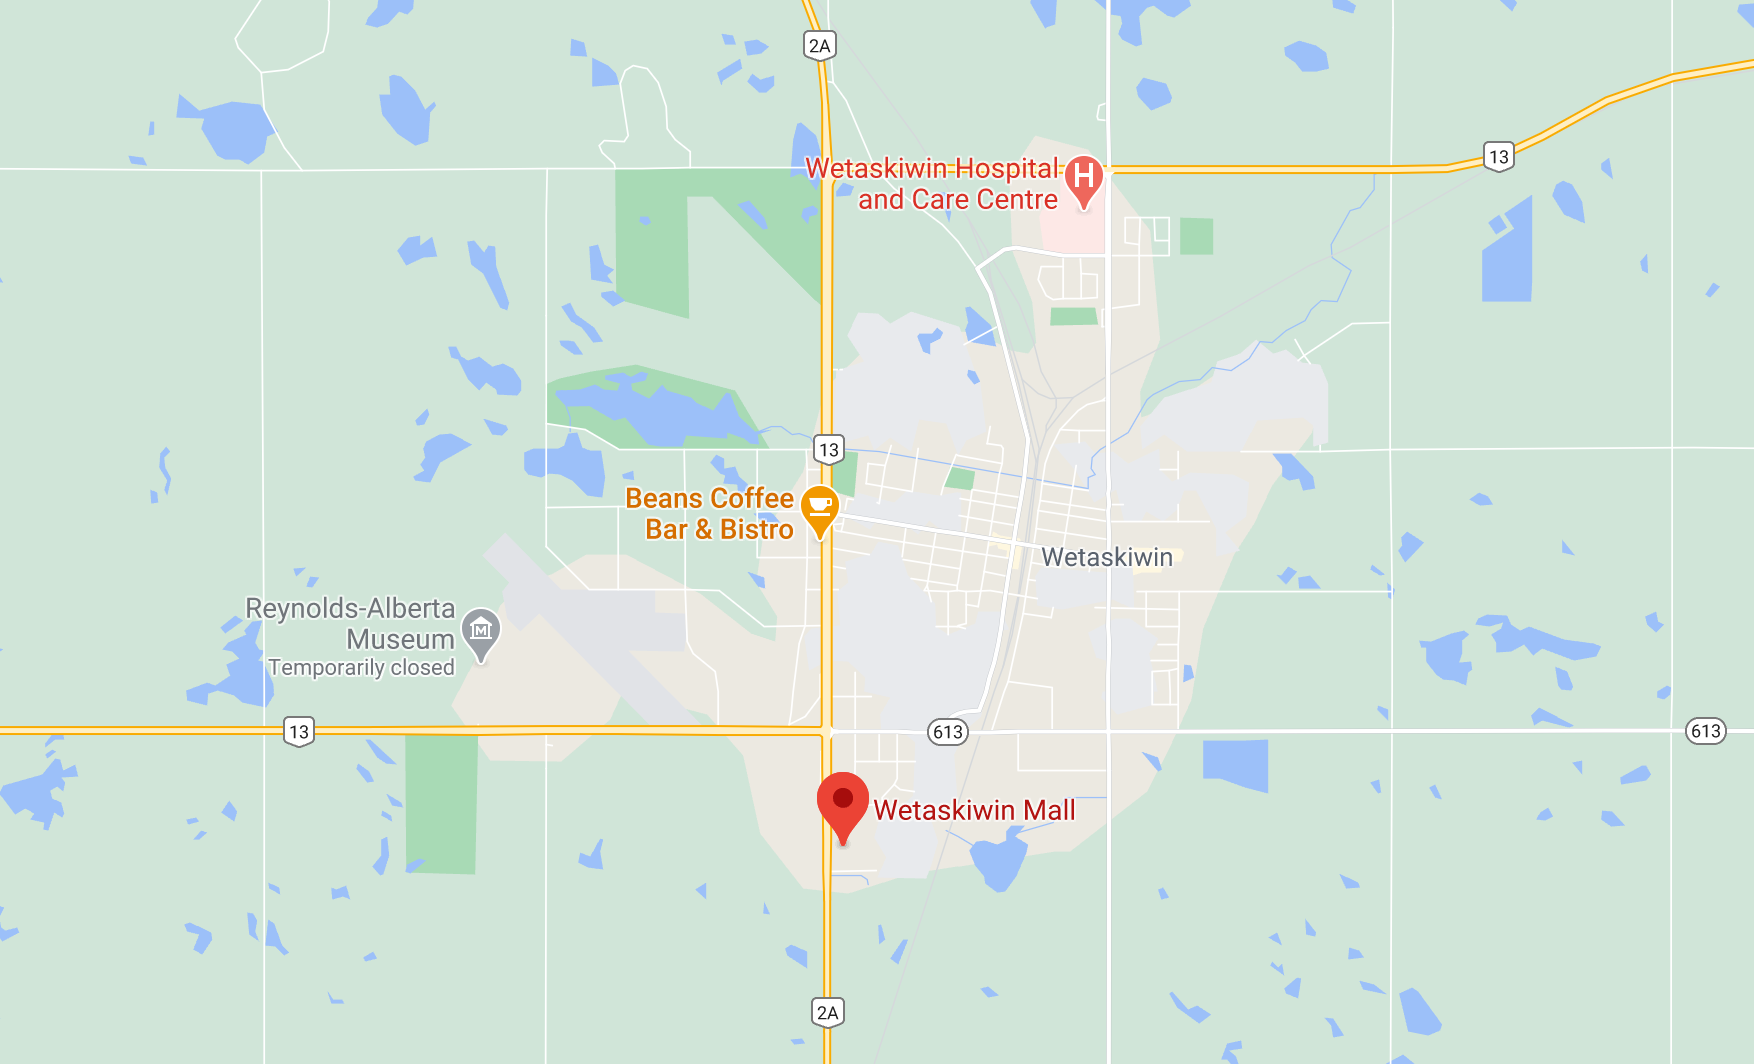 Google Map of Wetaskiwin Mall and surrounding area